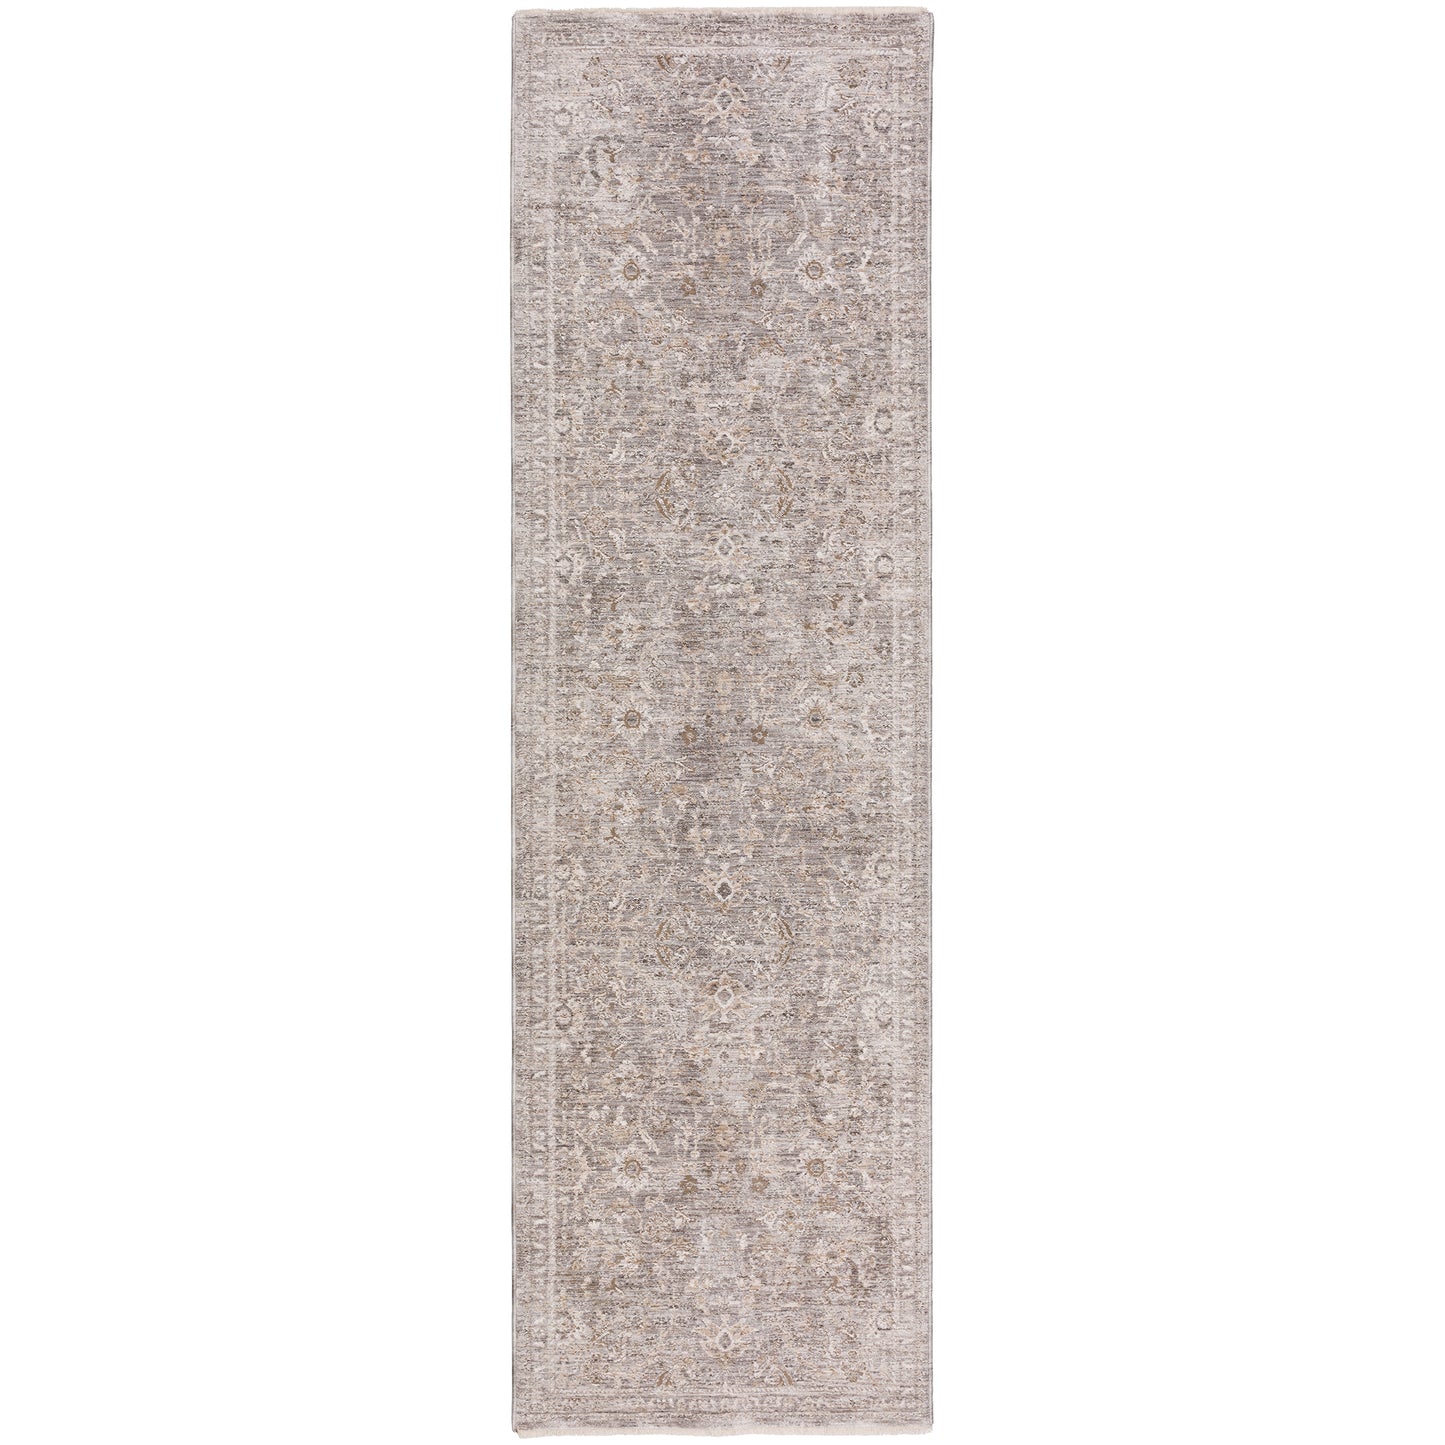 Dalyn Rugs Cyprus CY9 Silver  Transitional Power Woven Rug